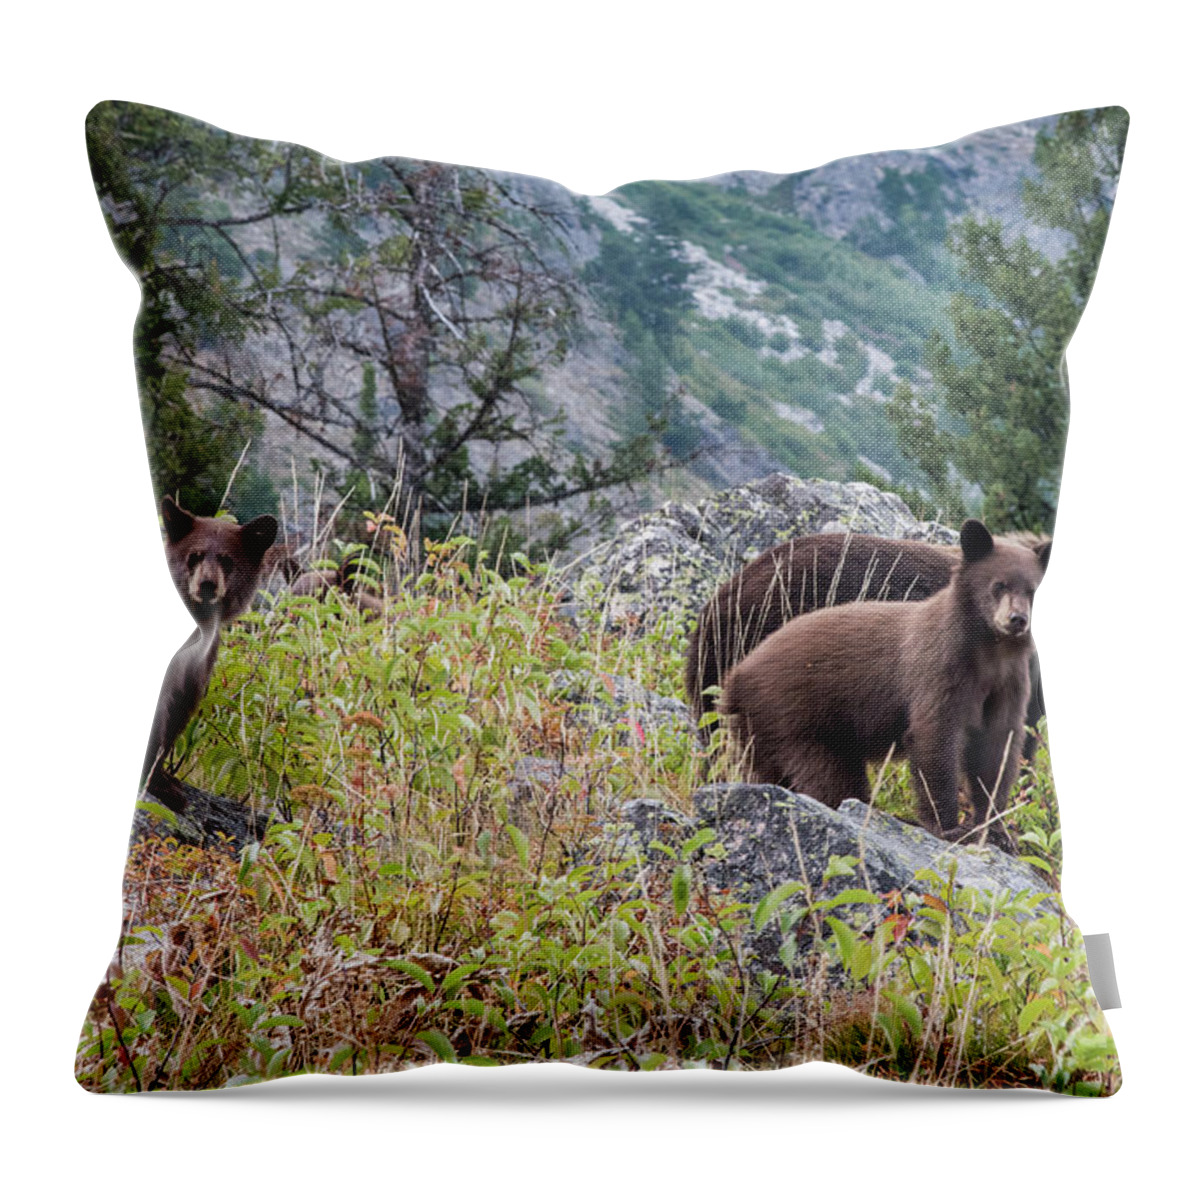 Bear Throw Pillow featuring the photograph What Are You Looking At? by Paul Quinn